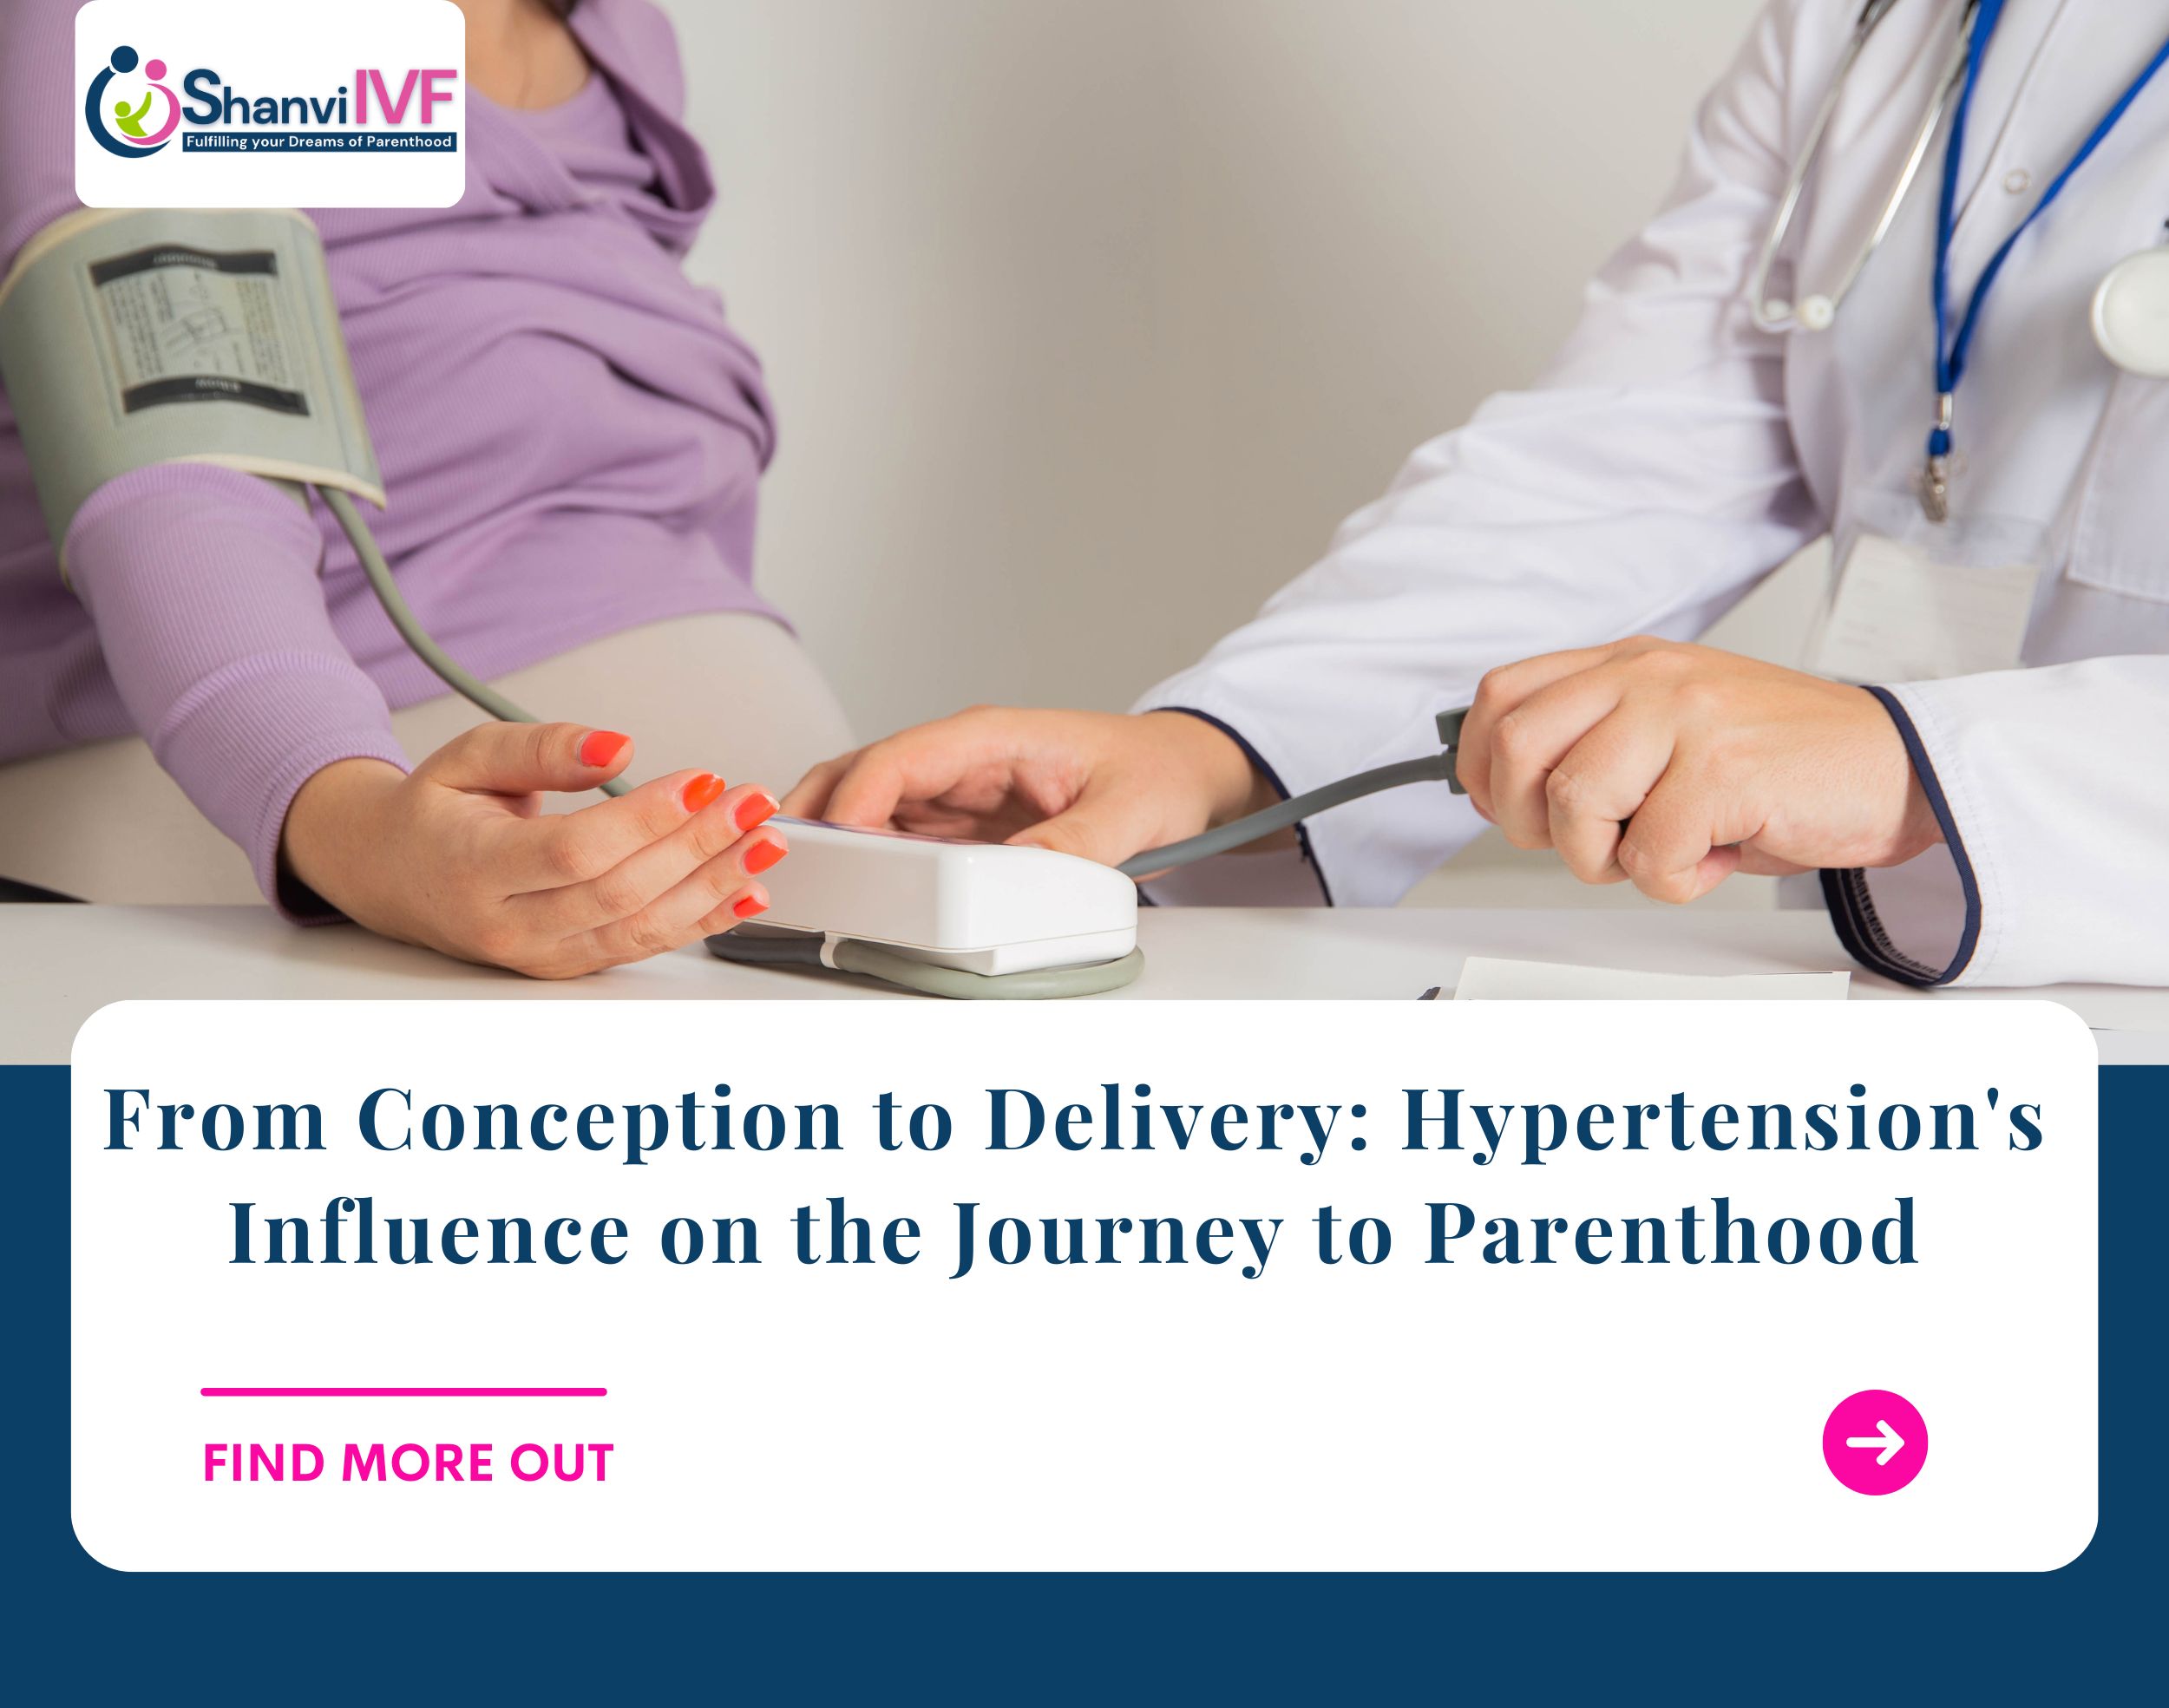 From Conception to Delivery: Hypertension’s Influence on the Journey to Parenthood